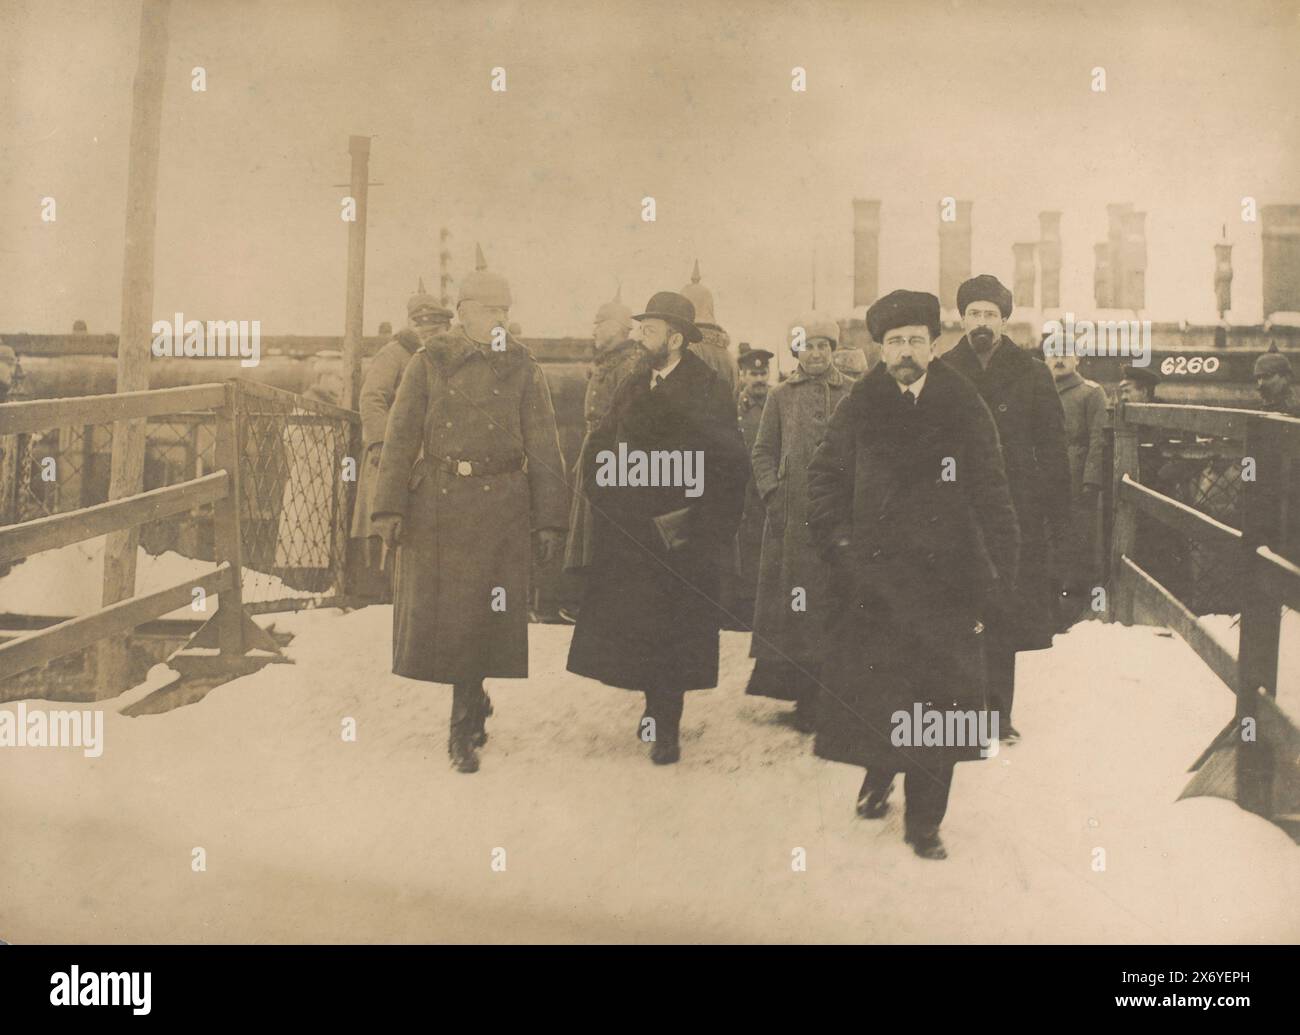 Arrival of the Russian delegation at the Brest-Litovsk peace negotiations, From left to right: Major Brinkmann, Adolf Joffe, Anastasia Bizenko, Lev Kamenev and Lev Karachan., photograph, anonymous, Brest, 28-Nov-1917, baryta paper, gelatin silver print, height, 281 mm × width, 389 mm Stock Photo